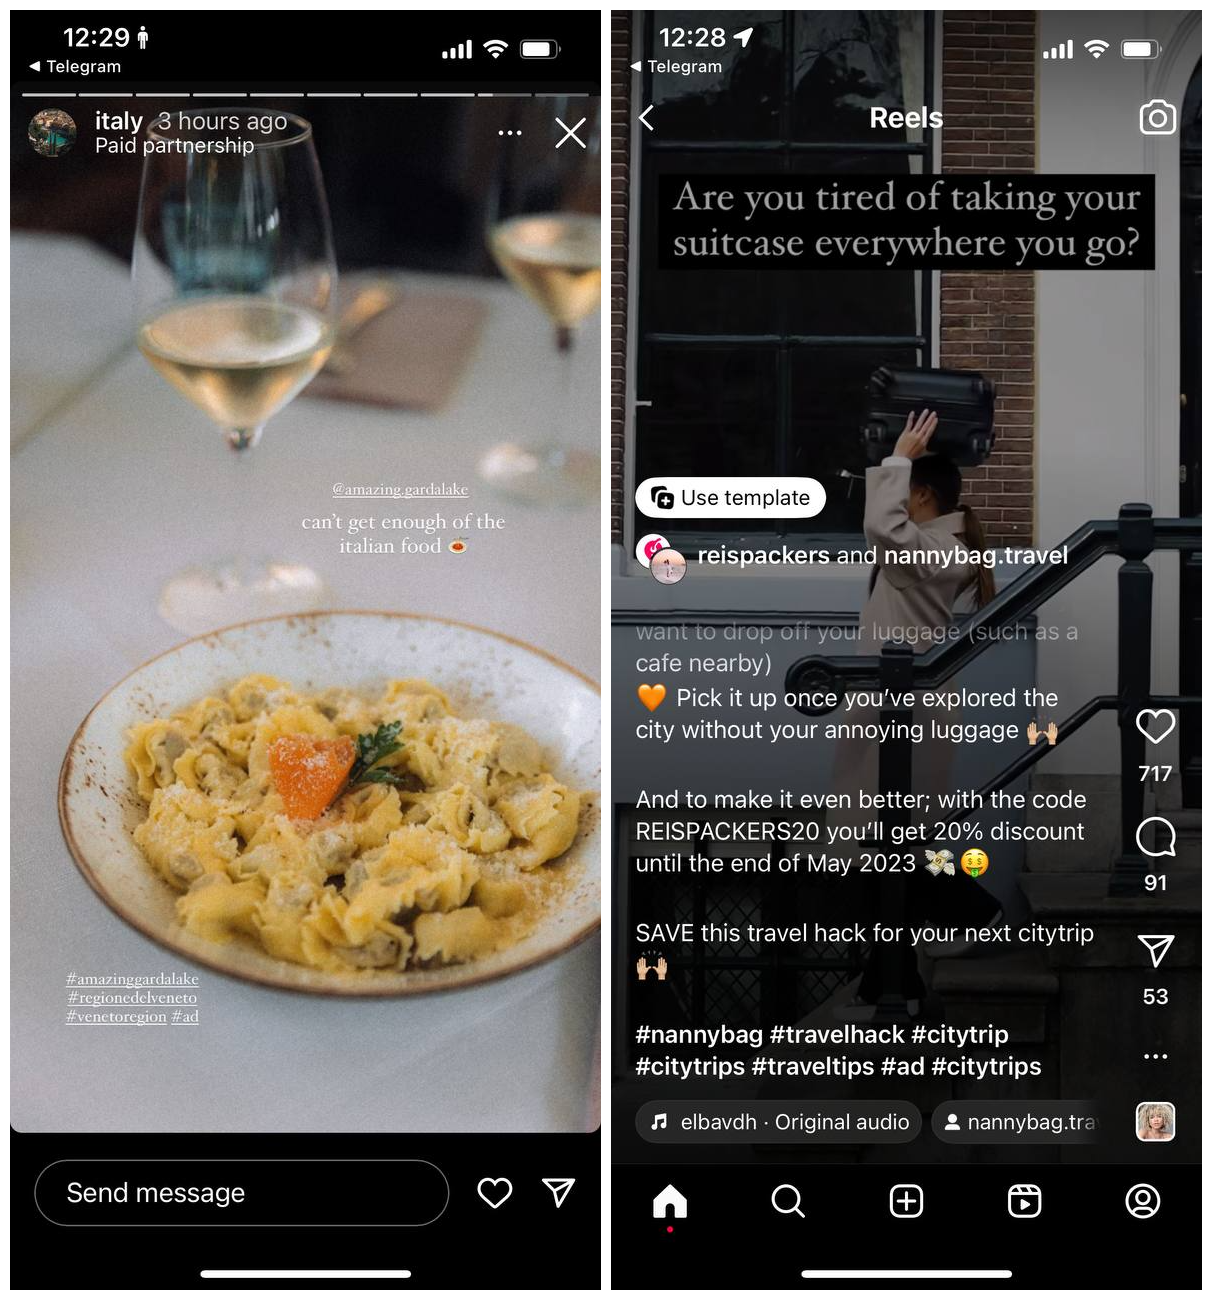 A screenshot featuring examples of disclosure on Reisepackers Instagram account.